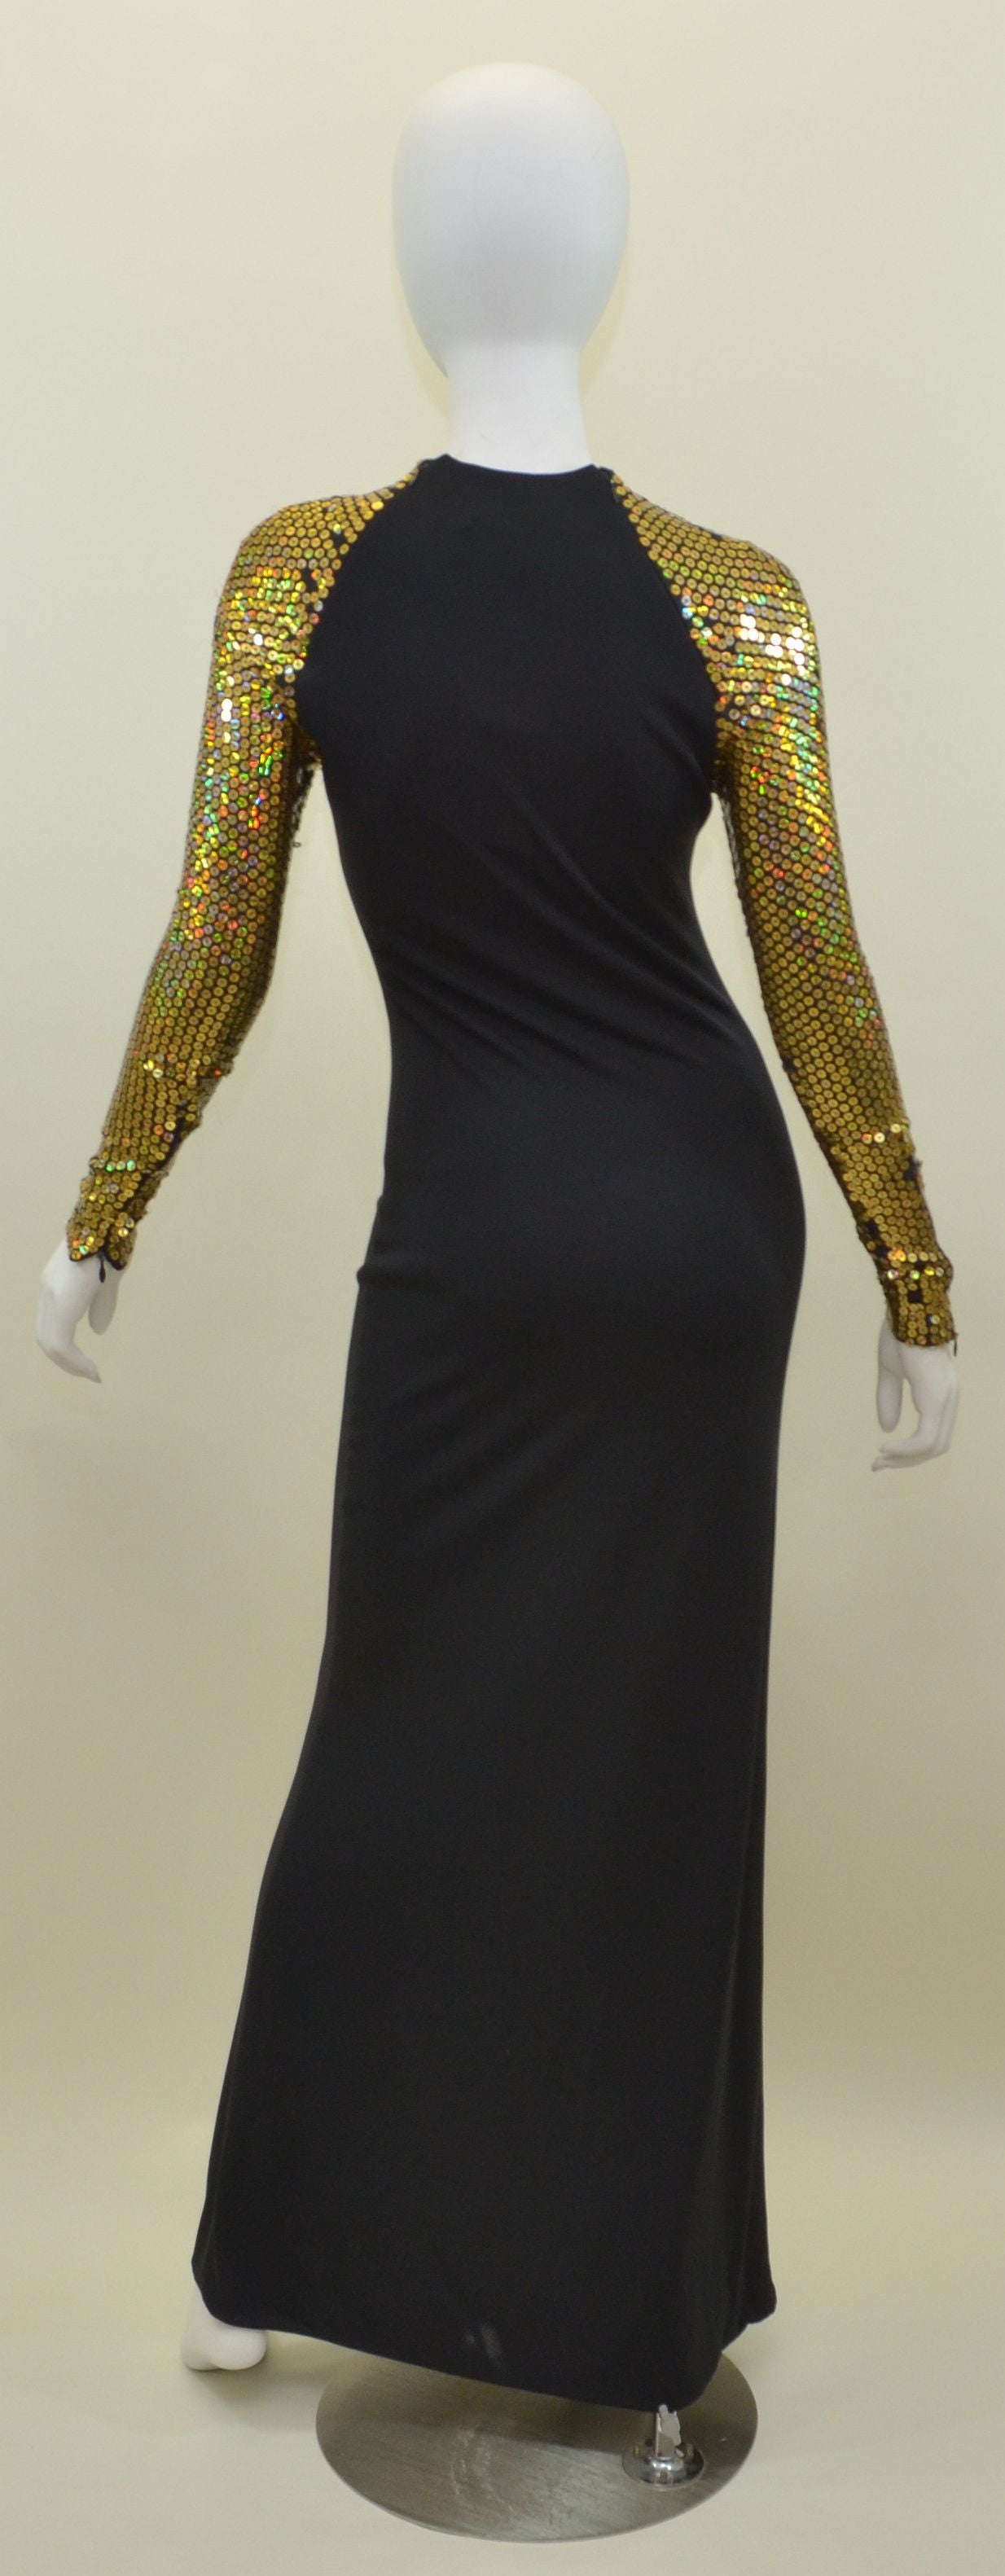 black and gold jersey dress